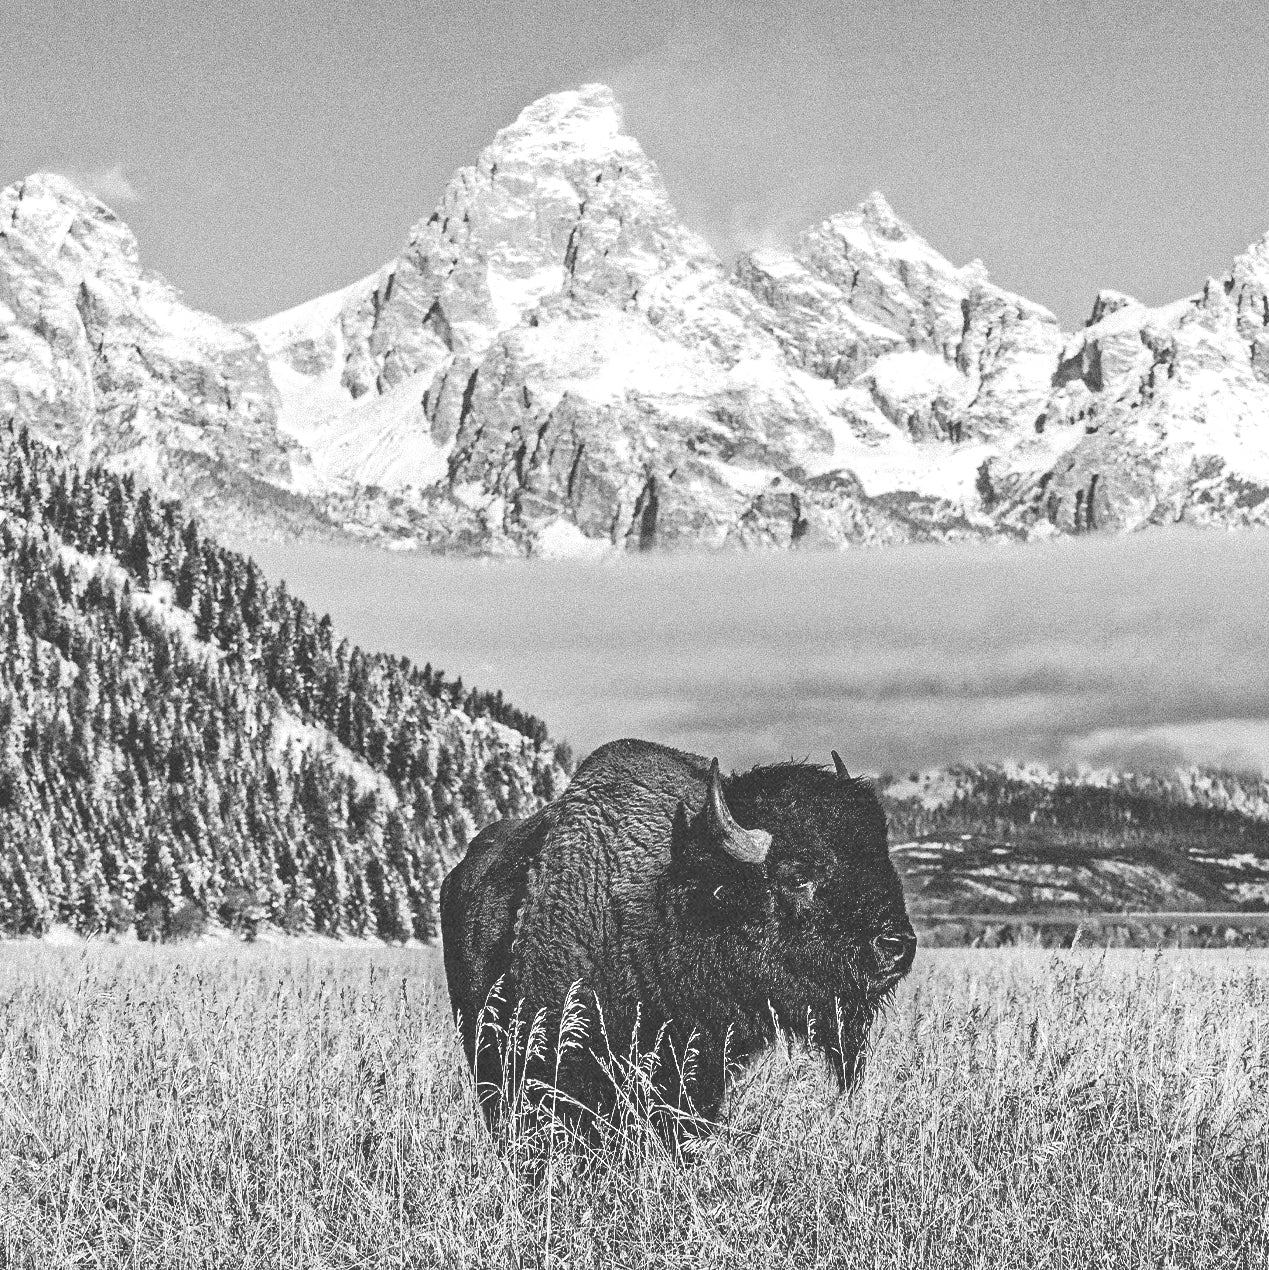 A buffalo in a field with a mountainous backdrop